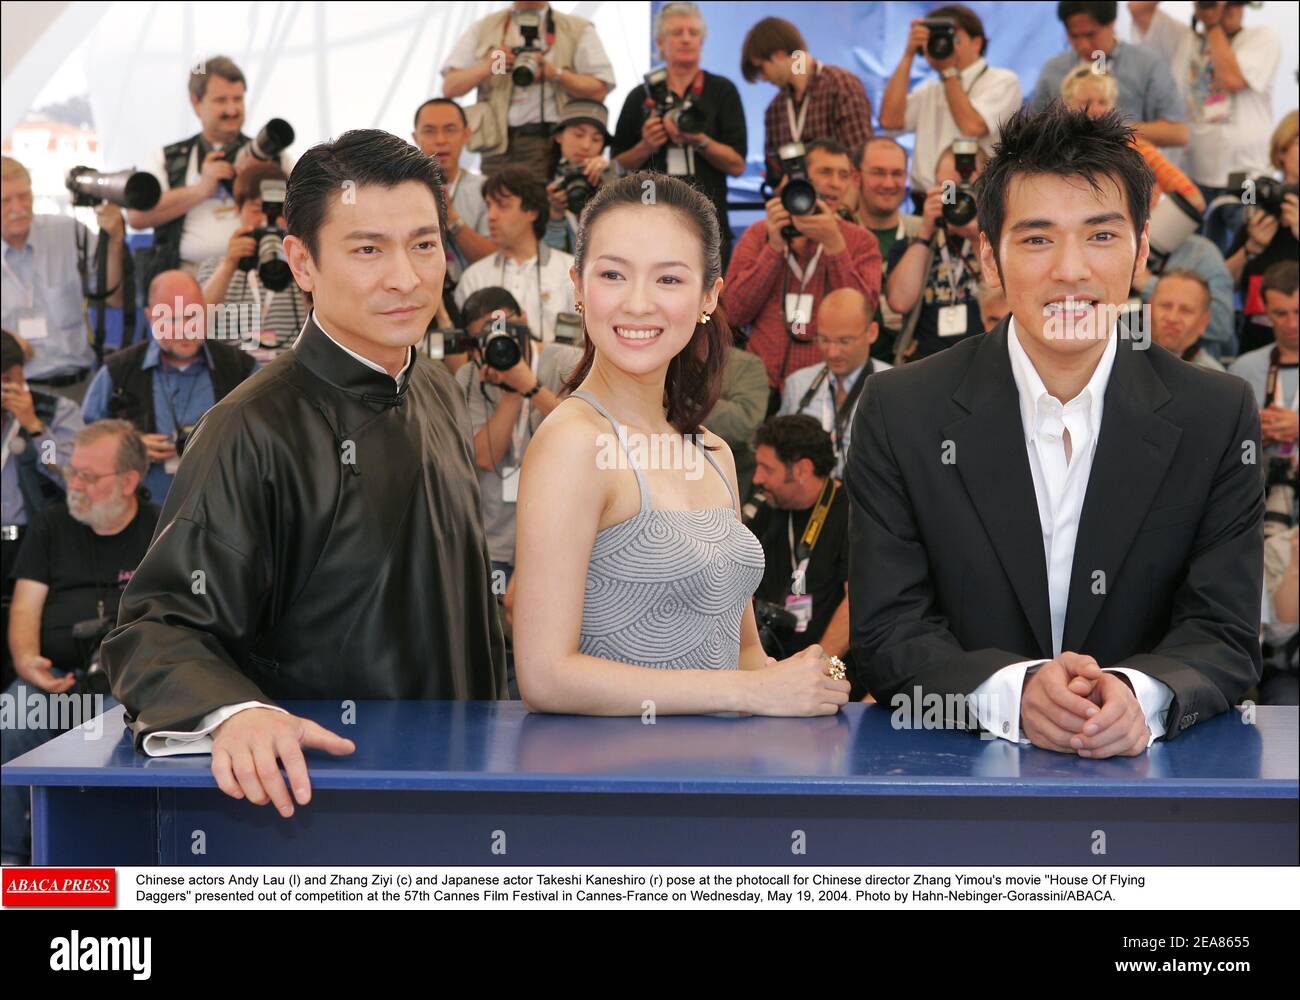 Chinese actors Andy Lau (l) and Zhang Ziyi (c) and Japanese actor Takeshi Kaneshiro (r) pose at the photocall for Chinese director Zhang Yimou's movie House Of Flying Daggers presented out of competition at the 57th Cannes Film Festival in Cannes-France on Wednesday, May 19, 2004. Photo by Hahn-Nebinger-Gorassini/ABACA. Stock Photo